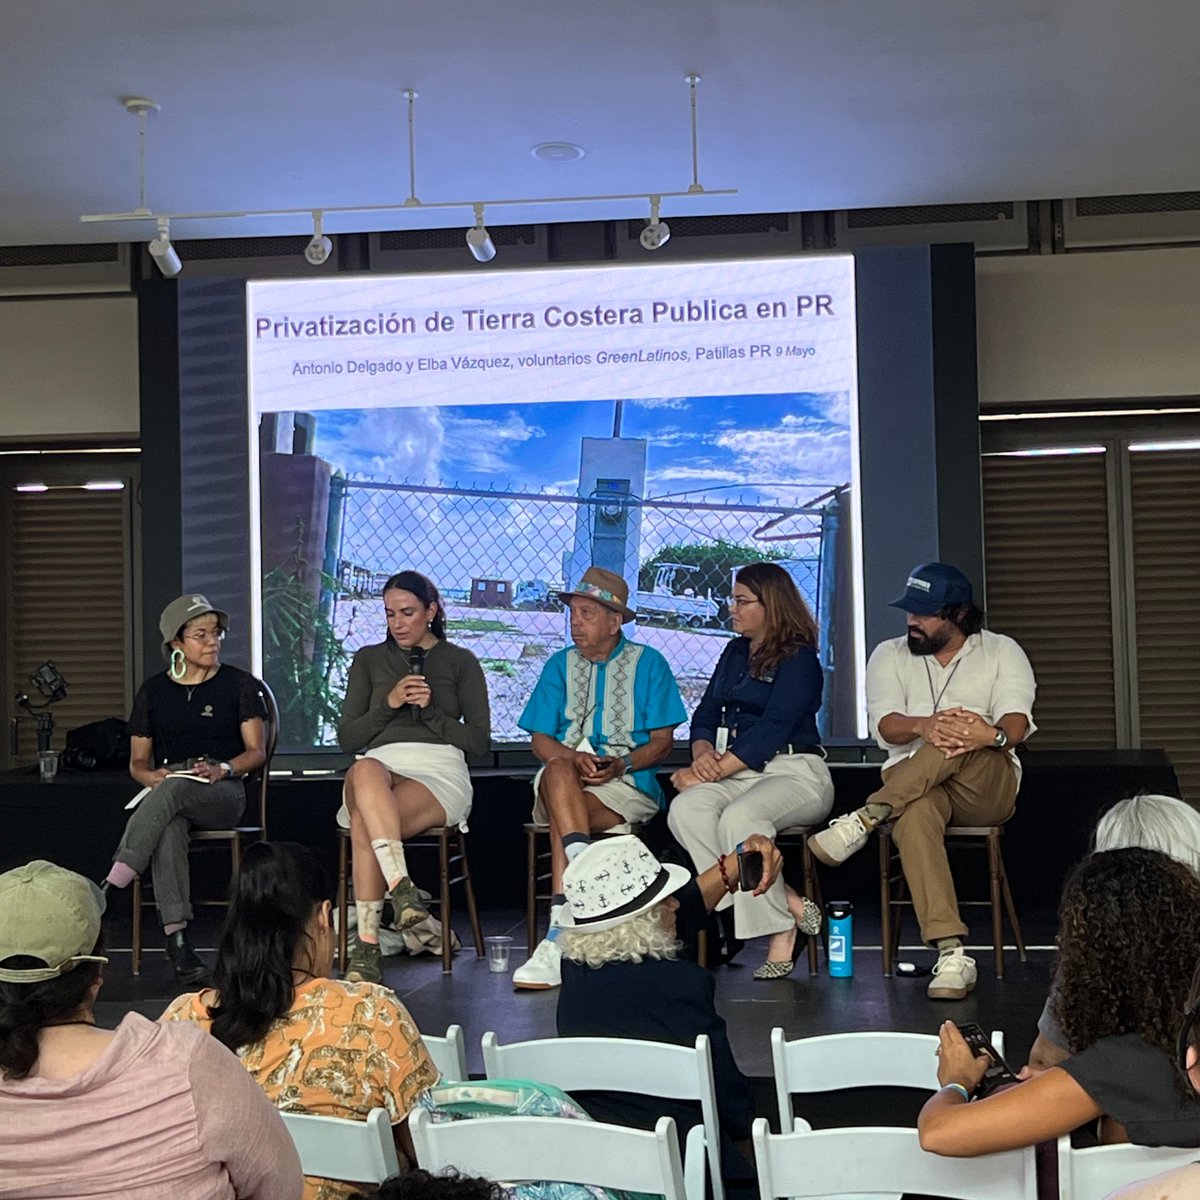 At Day 3 of the @GreenLatinos National Summit in Puerto Rico, Juliana heard from experts on climate disaster preparedness, public lands, ocean justice, & more. 🌊🌳 They also explored more of the beautiful El Yunque National Forest with fellow summit attendees!